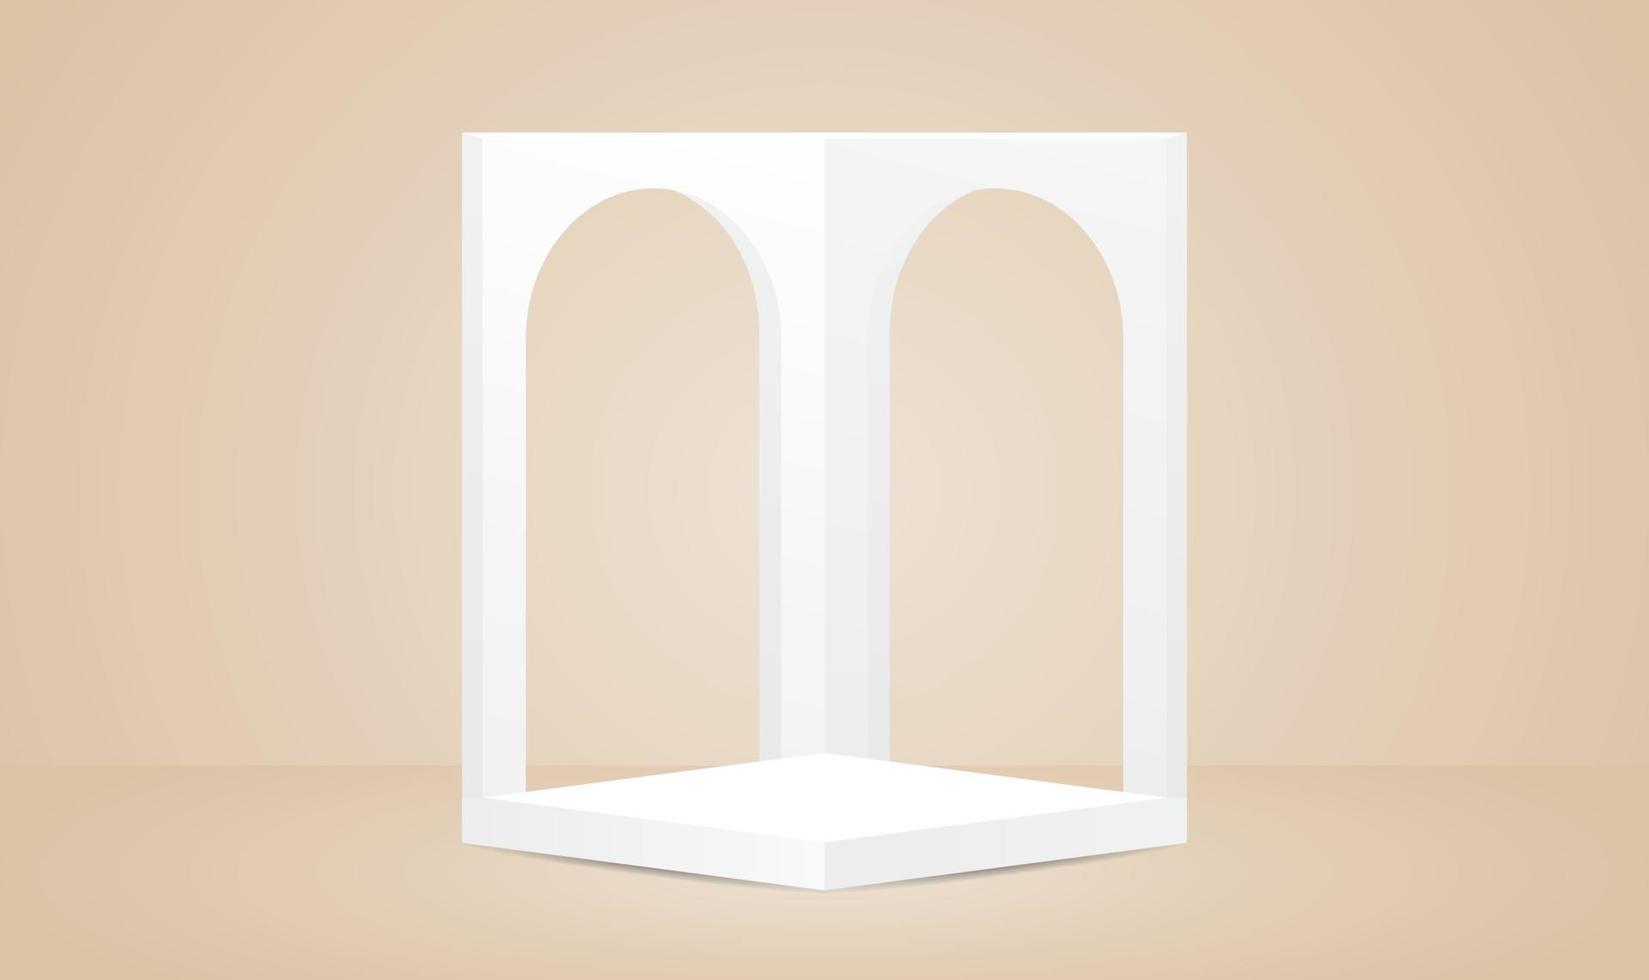 white fashionable minimal two arches display stage 3d illustration vector on beige color wall and floor for putting object